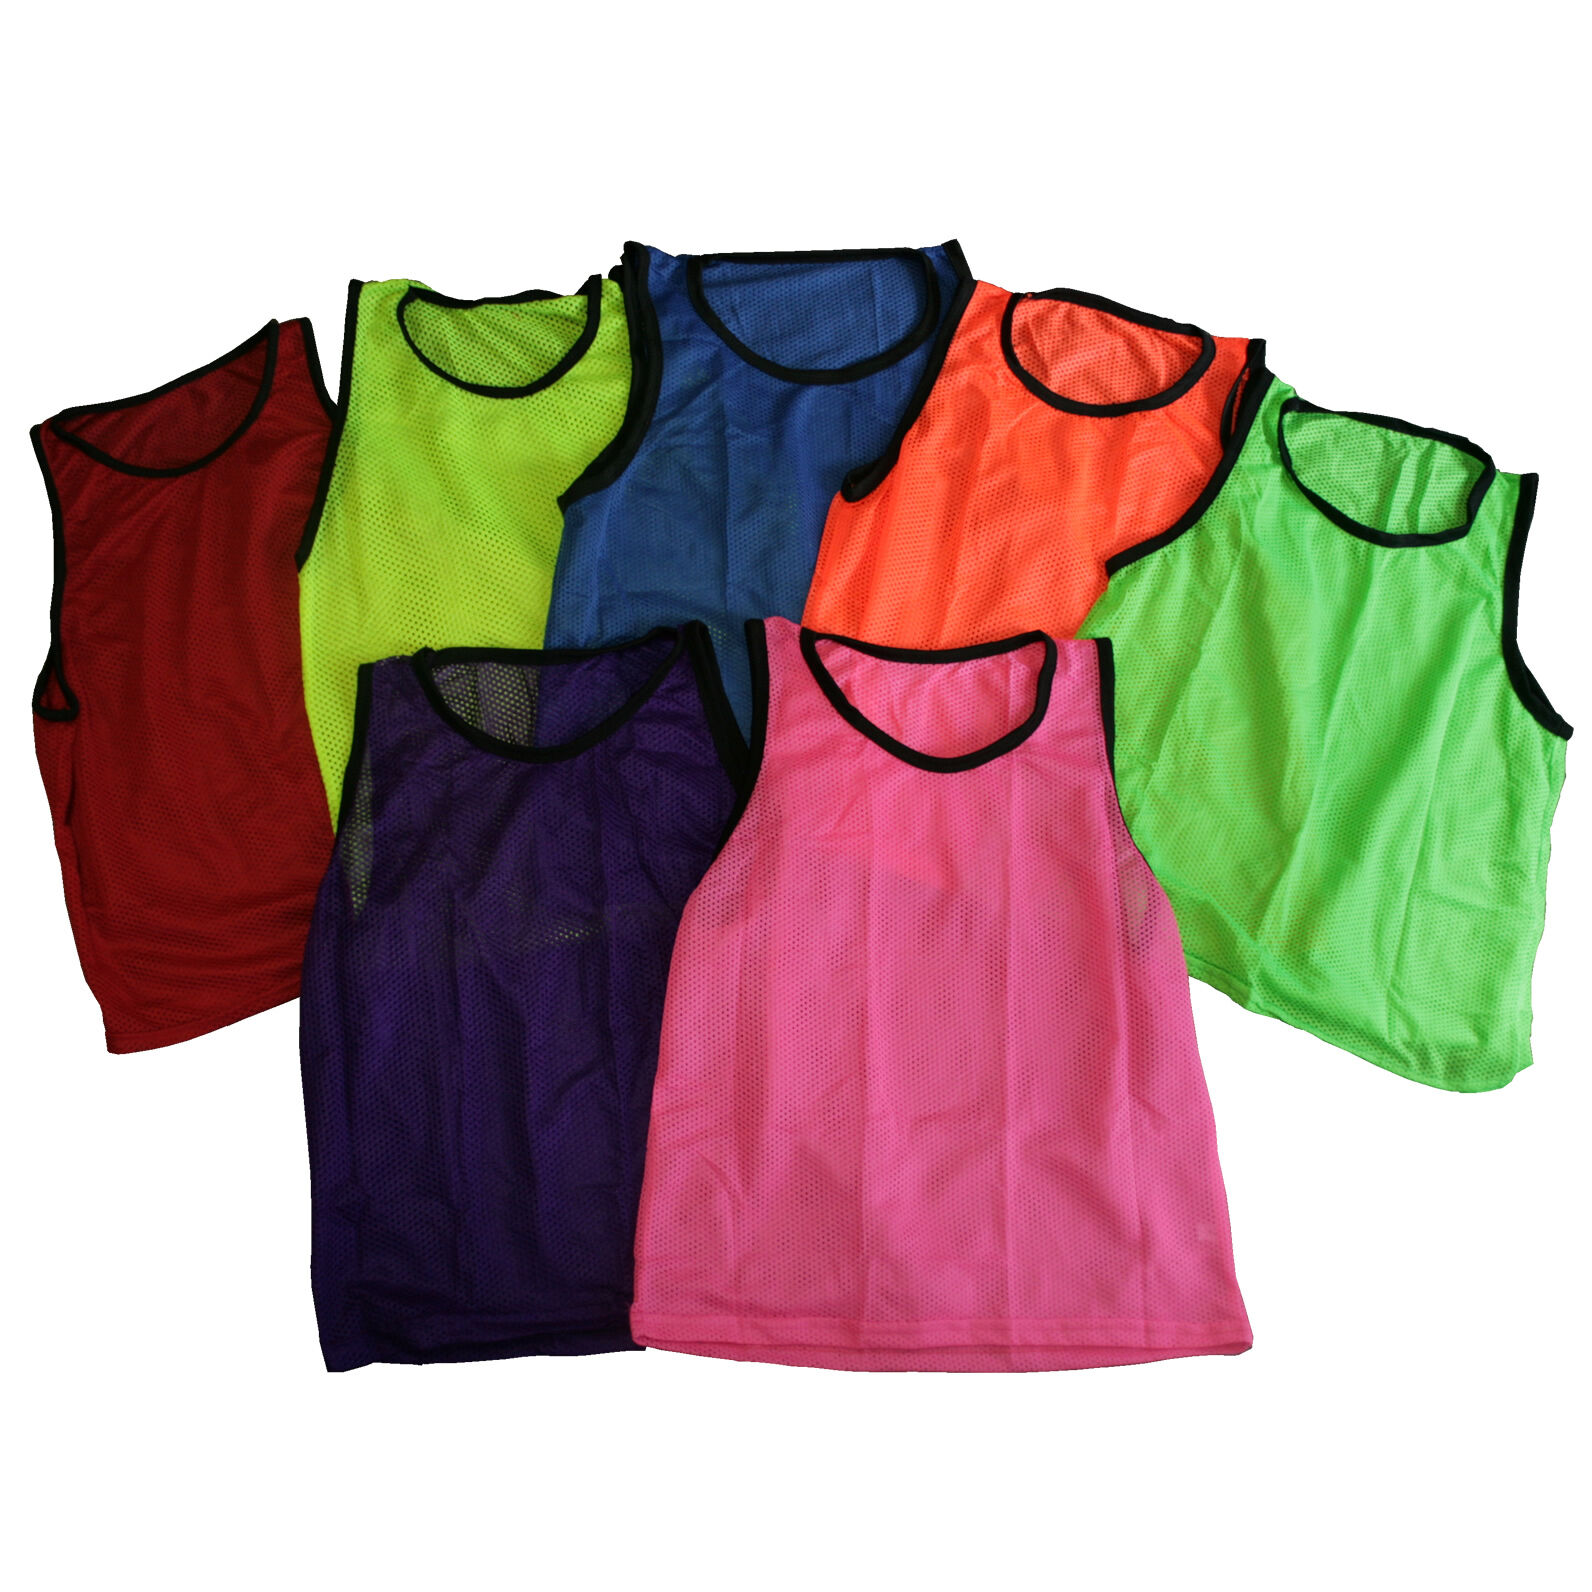 Great Choice Products (12) Pink Scrimmage Vests Pinnies Soccer, Softball, Track & Field Sz Youth